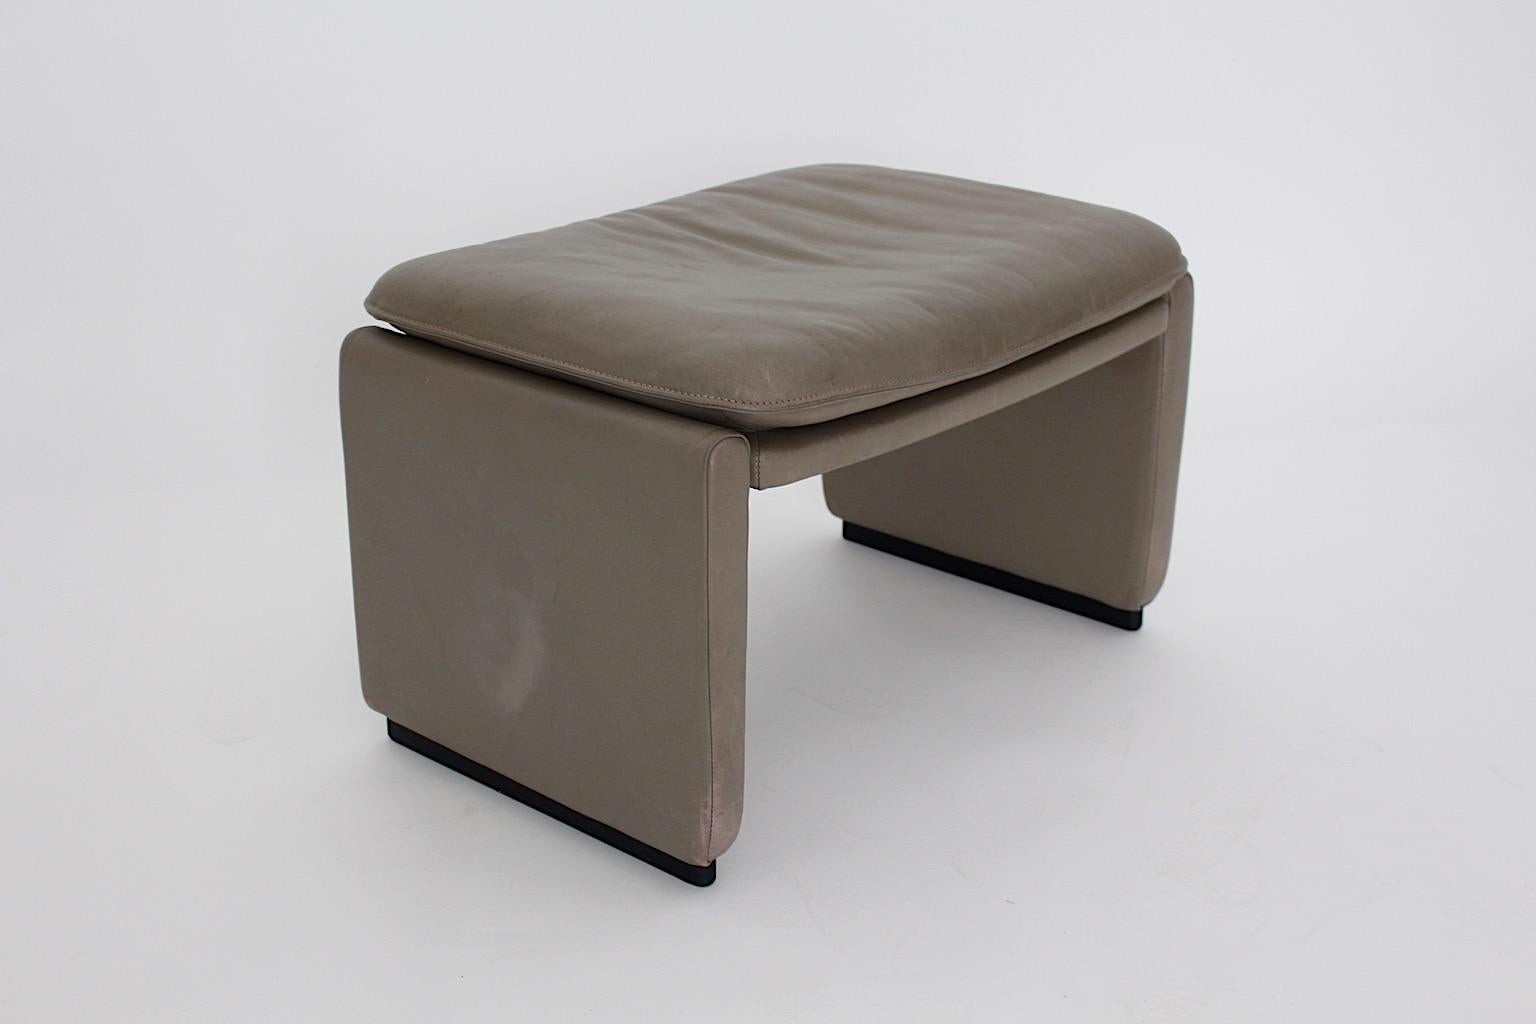 De Sede vintage footstool or stool from grey leather and steel 1980s Switzerland.
Through the pleasant light grey color tone the footstool or stool works with each color tone in your interior.
The finest quality stool is stable and sturdy and